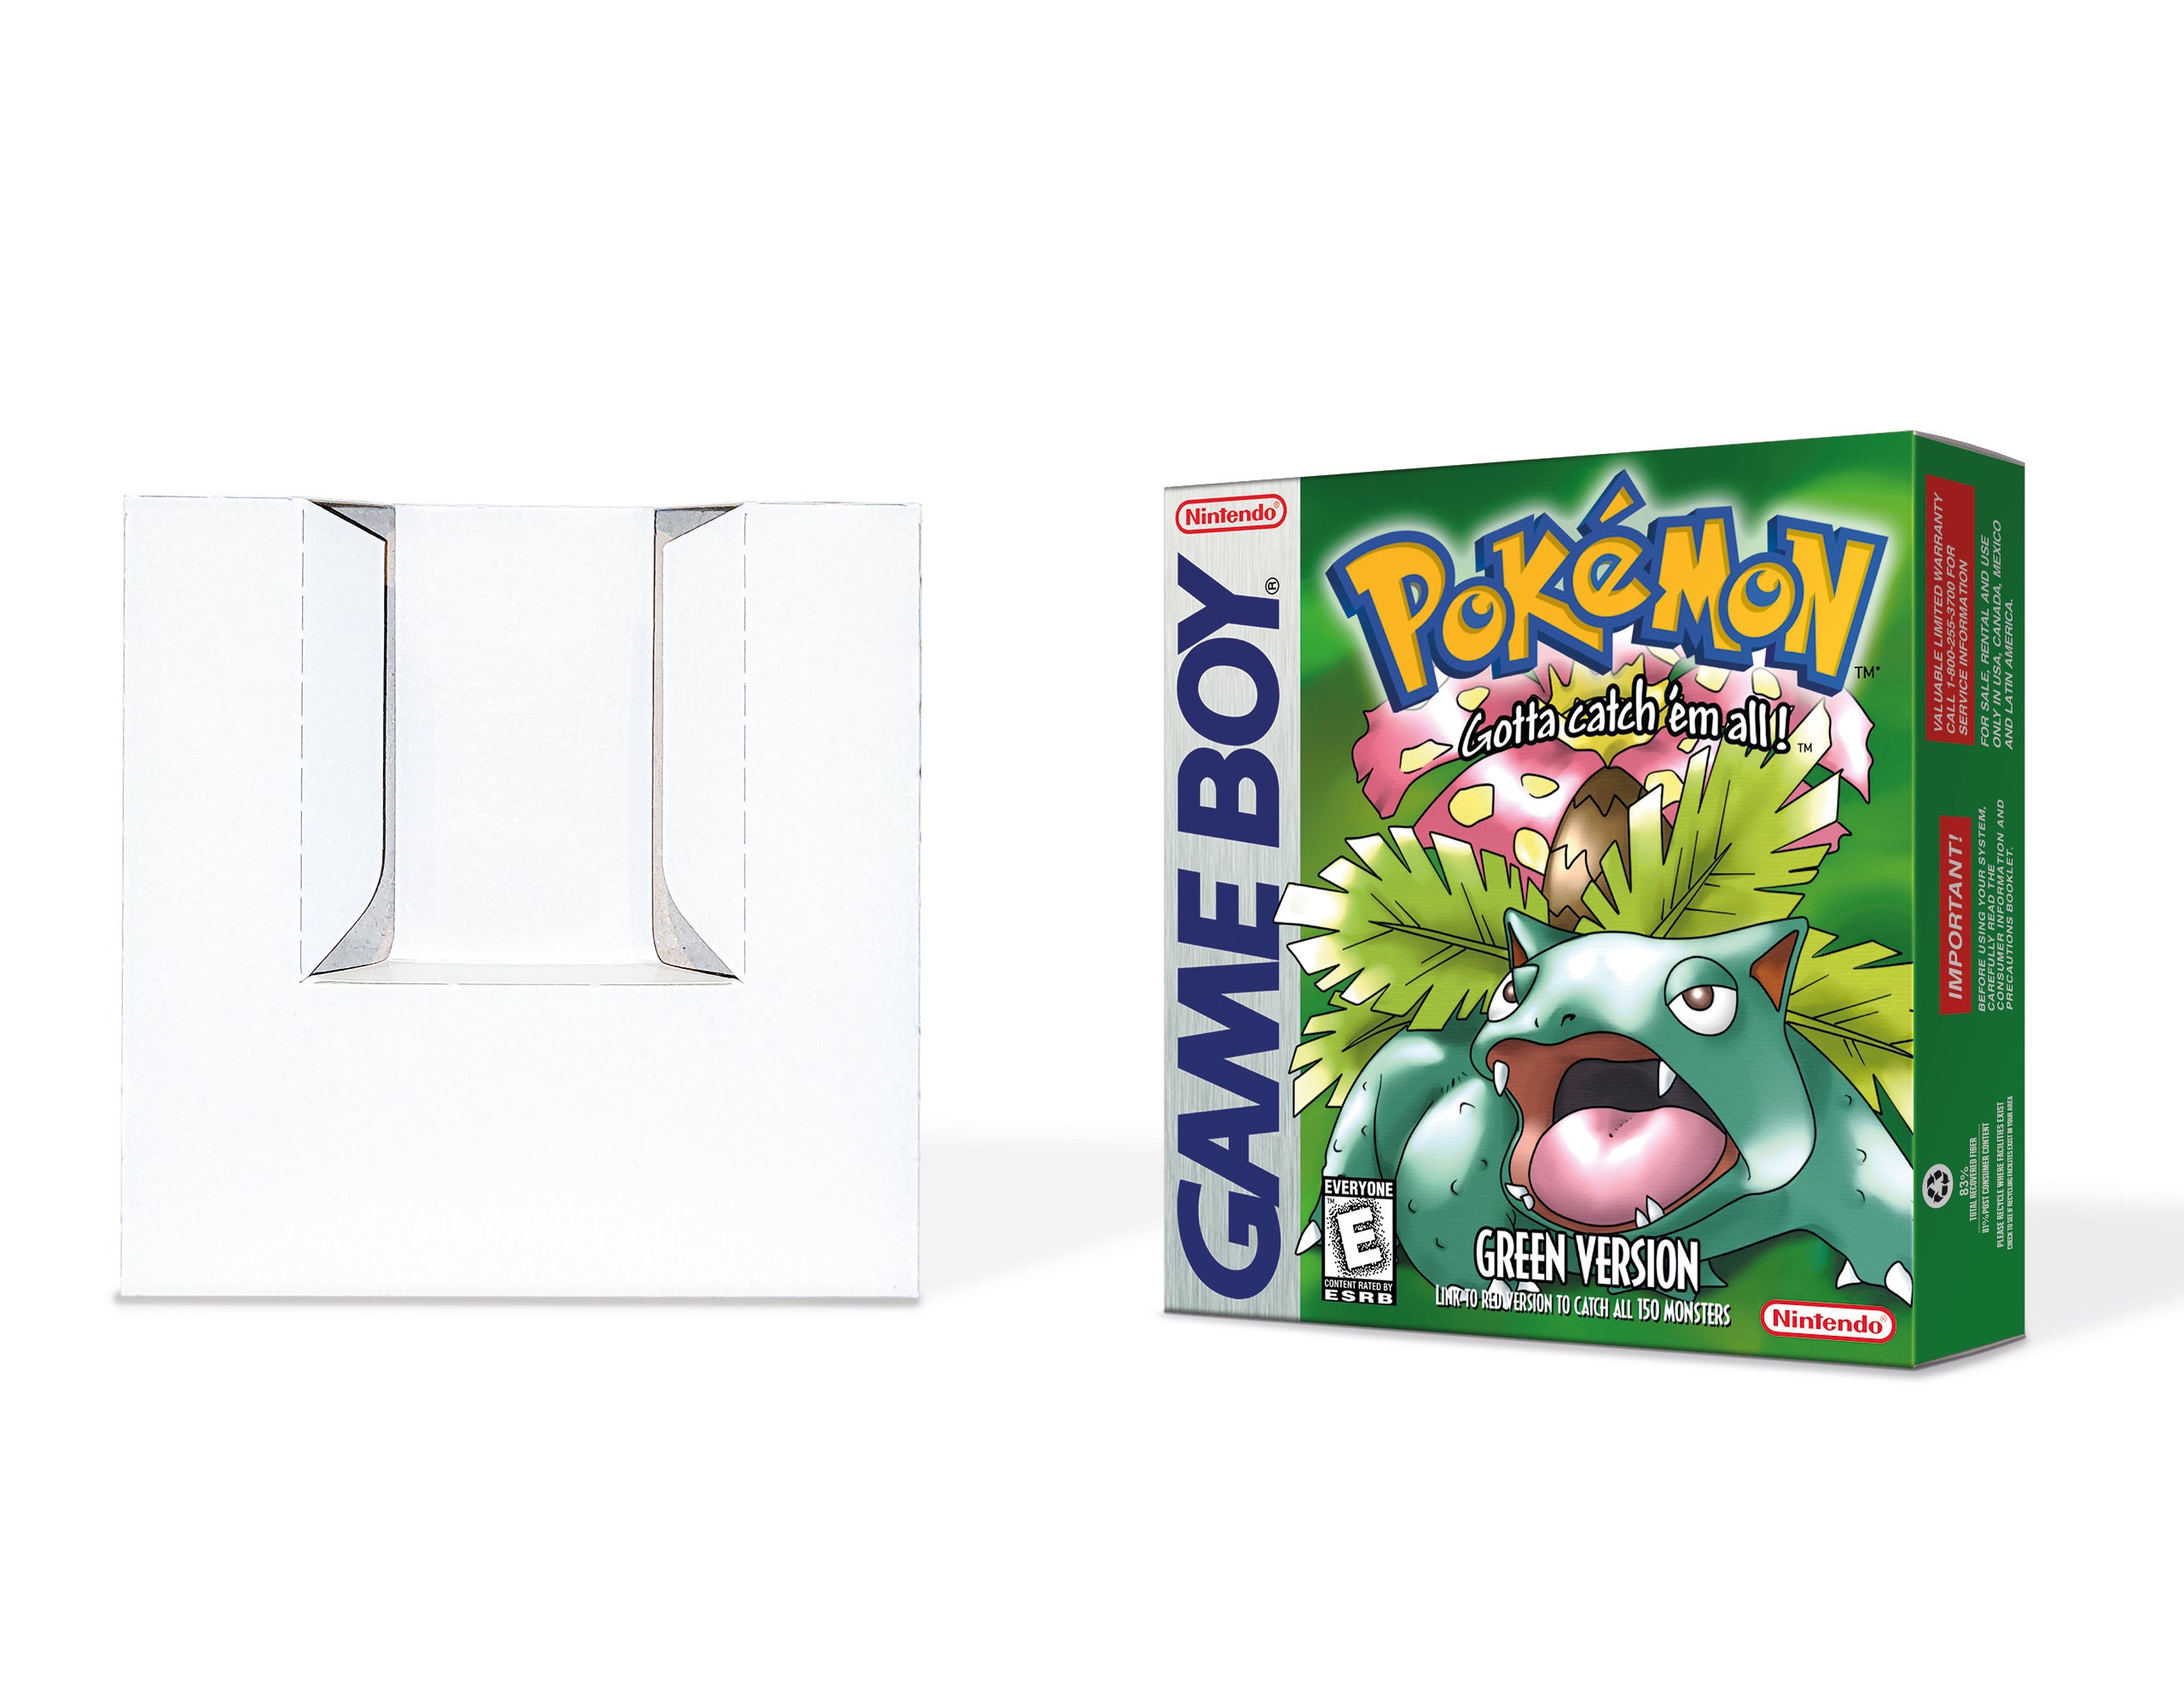 Pokemon Red Blue Yellow Green 4 Boxes for Game Boy Nintendo 4 Regions HQ  Inner Trays & Protector Cases 